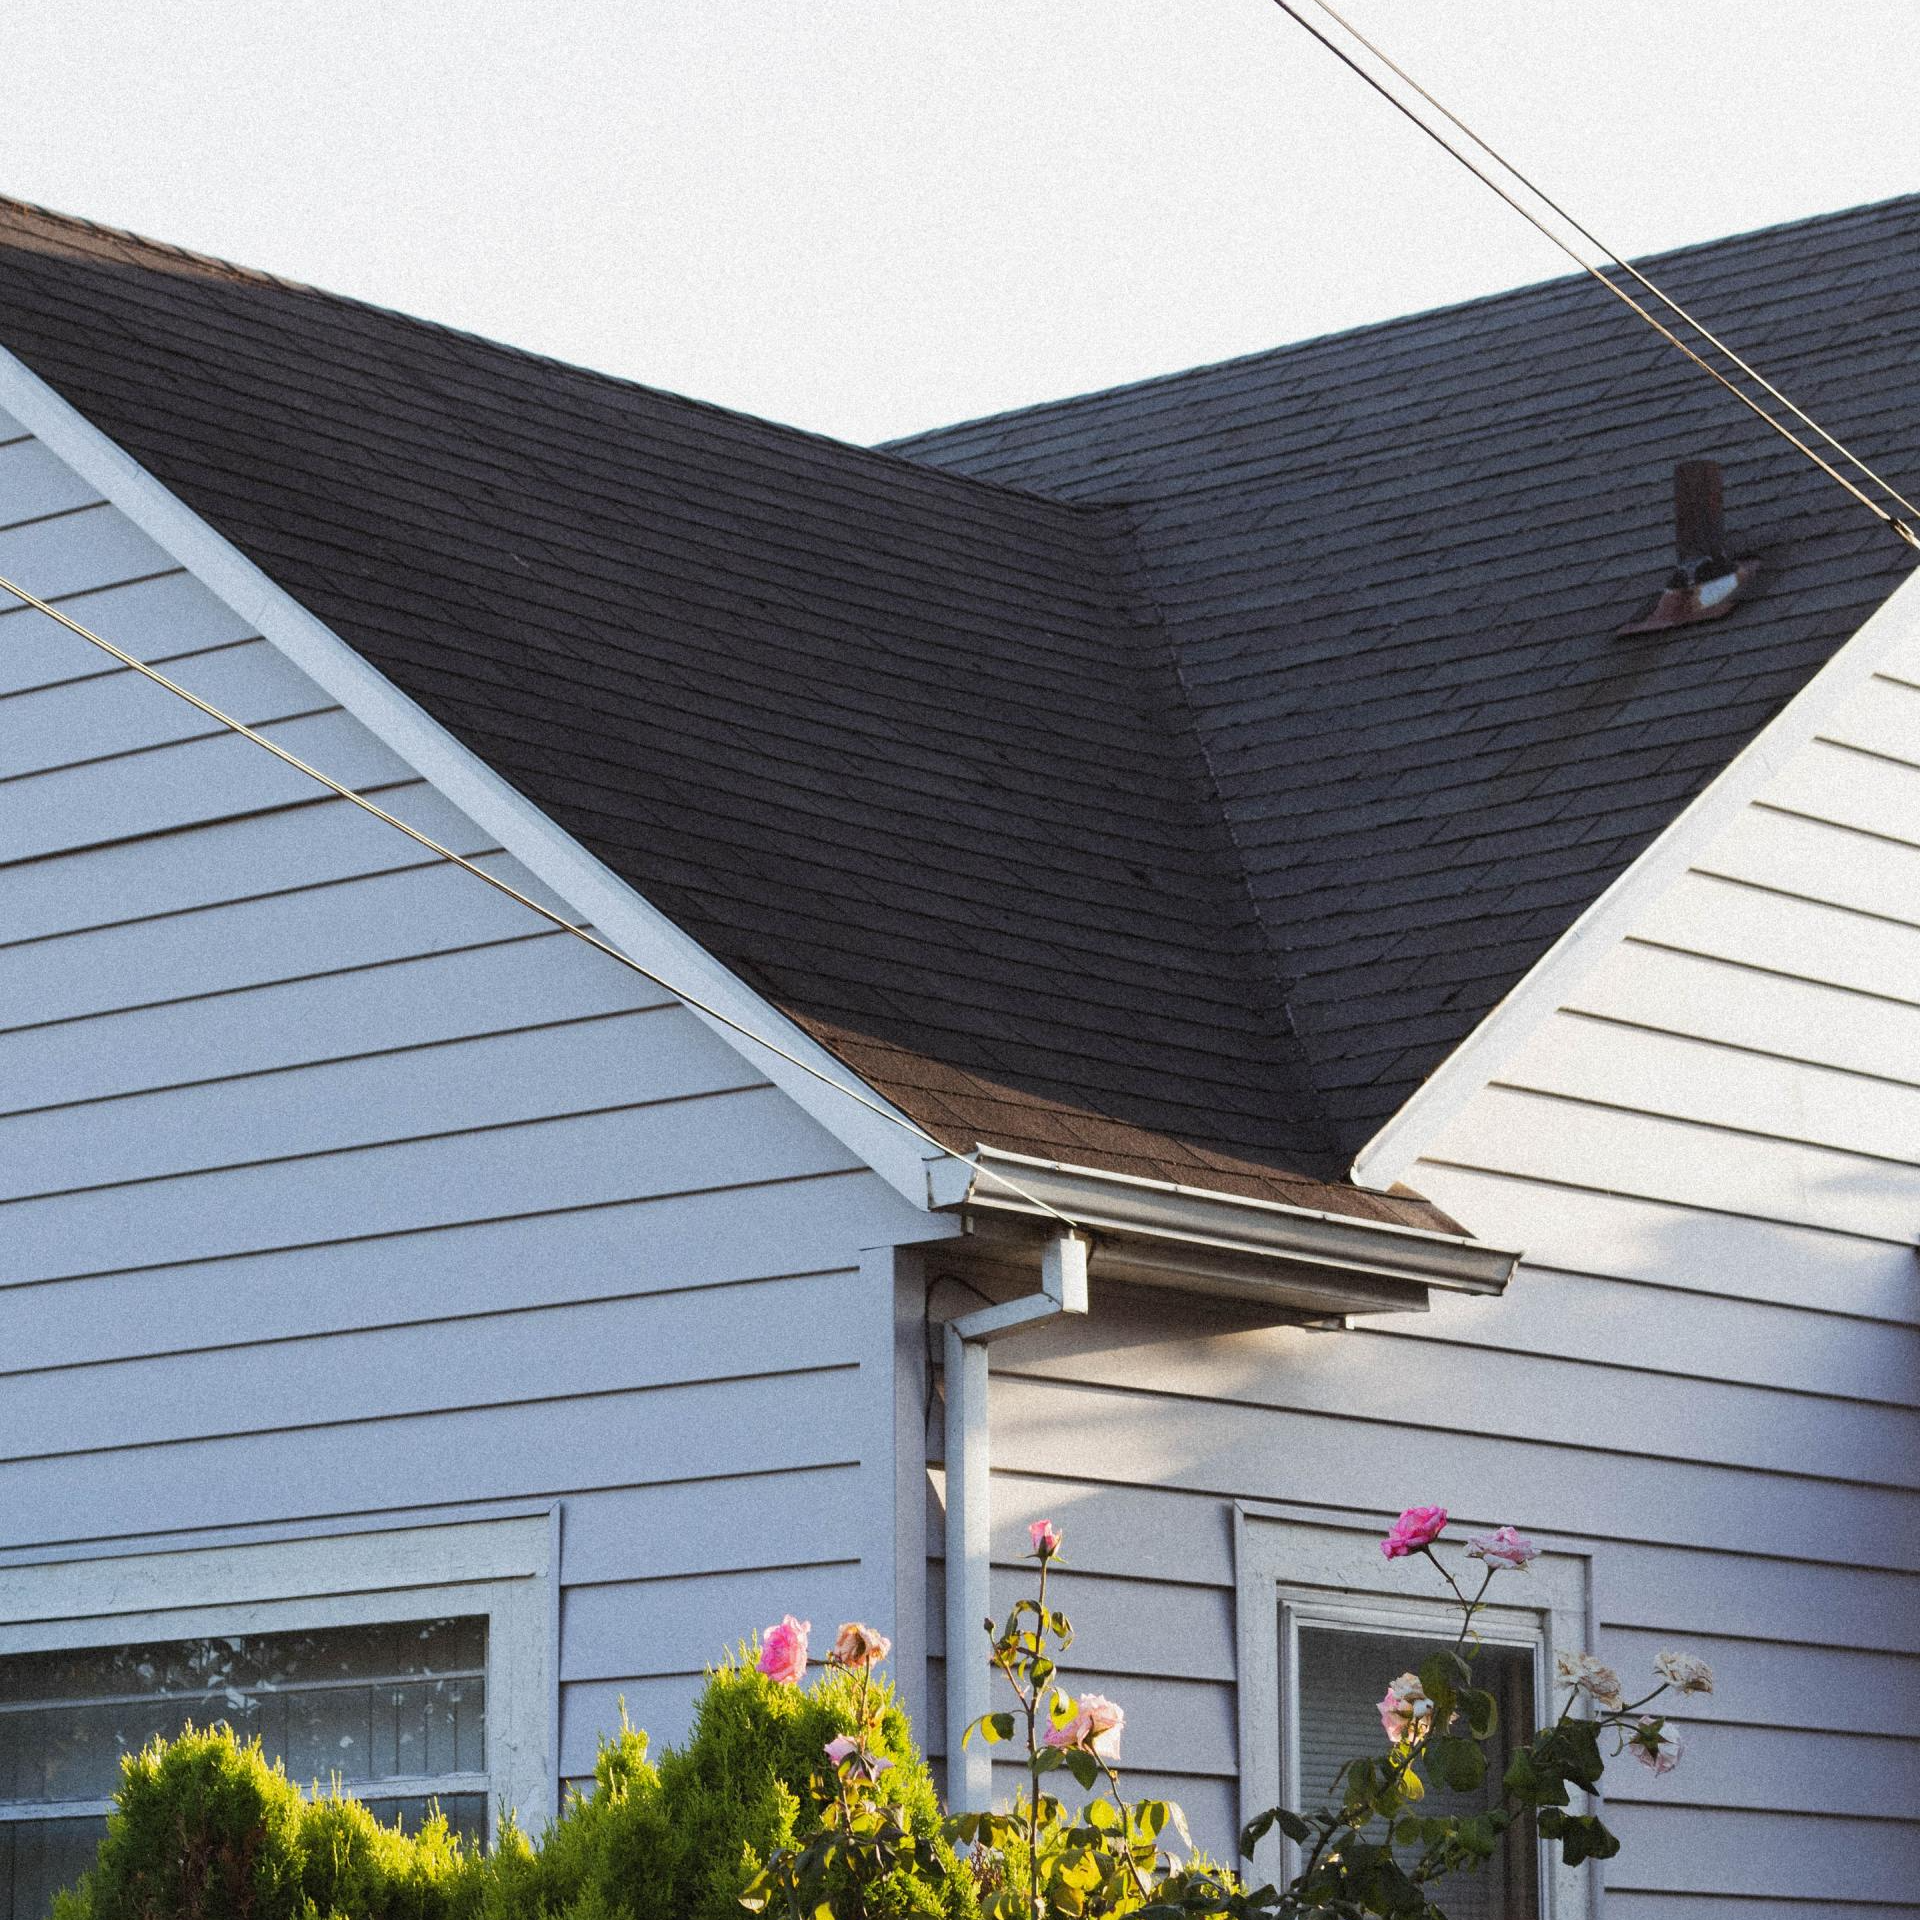 How long should a new roof installation take